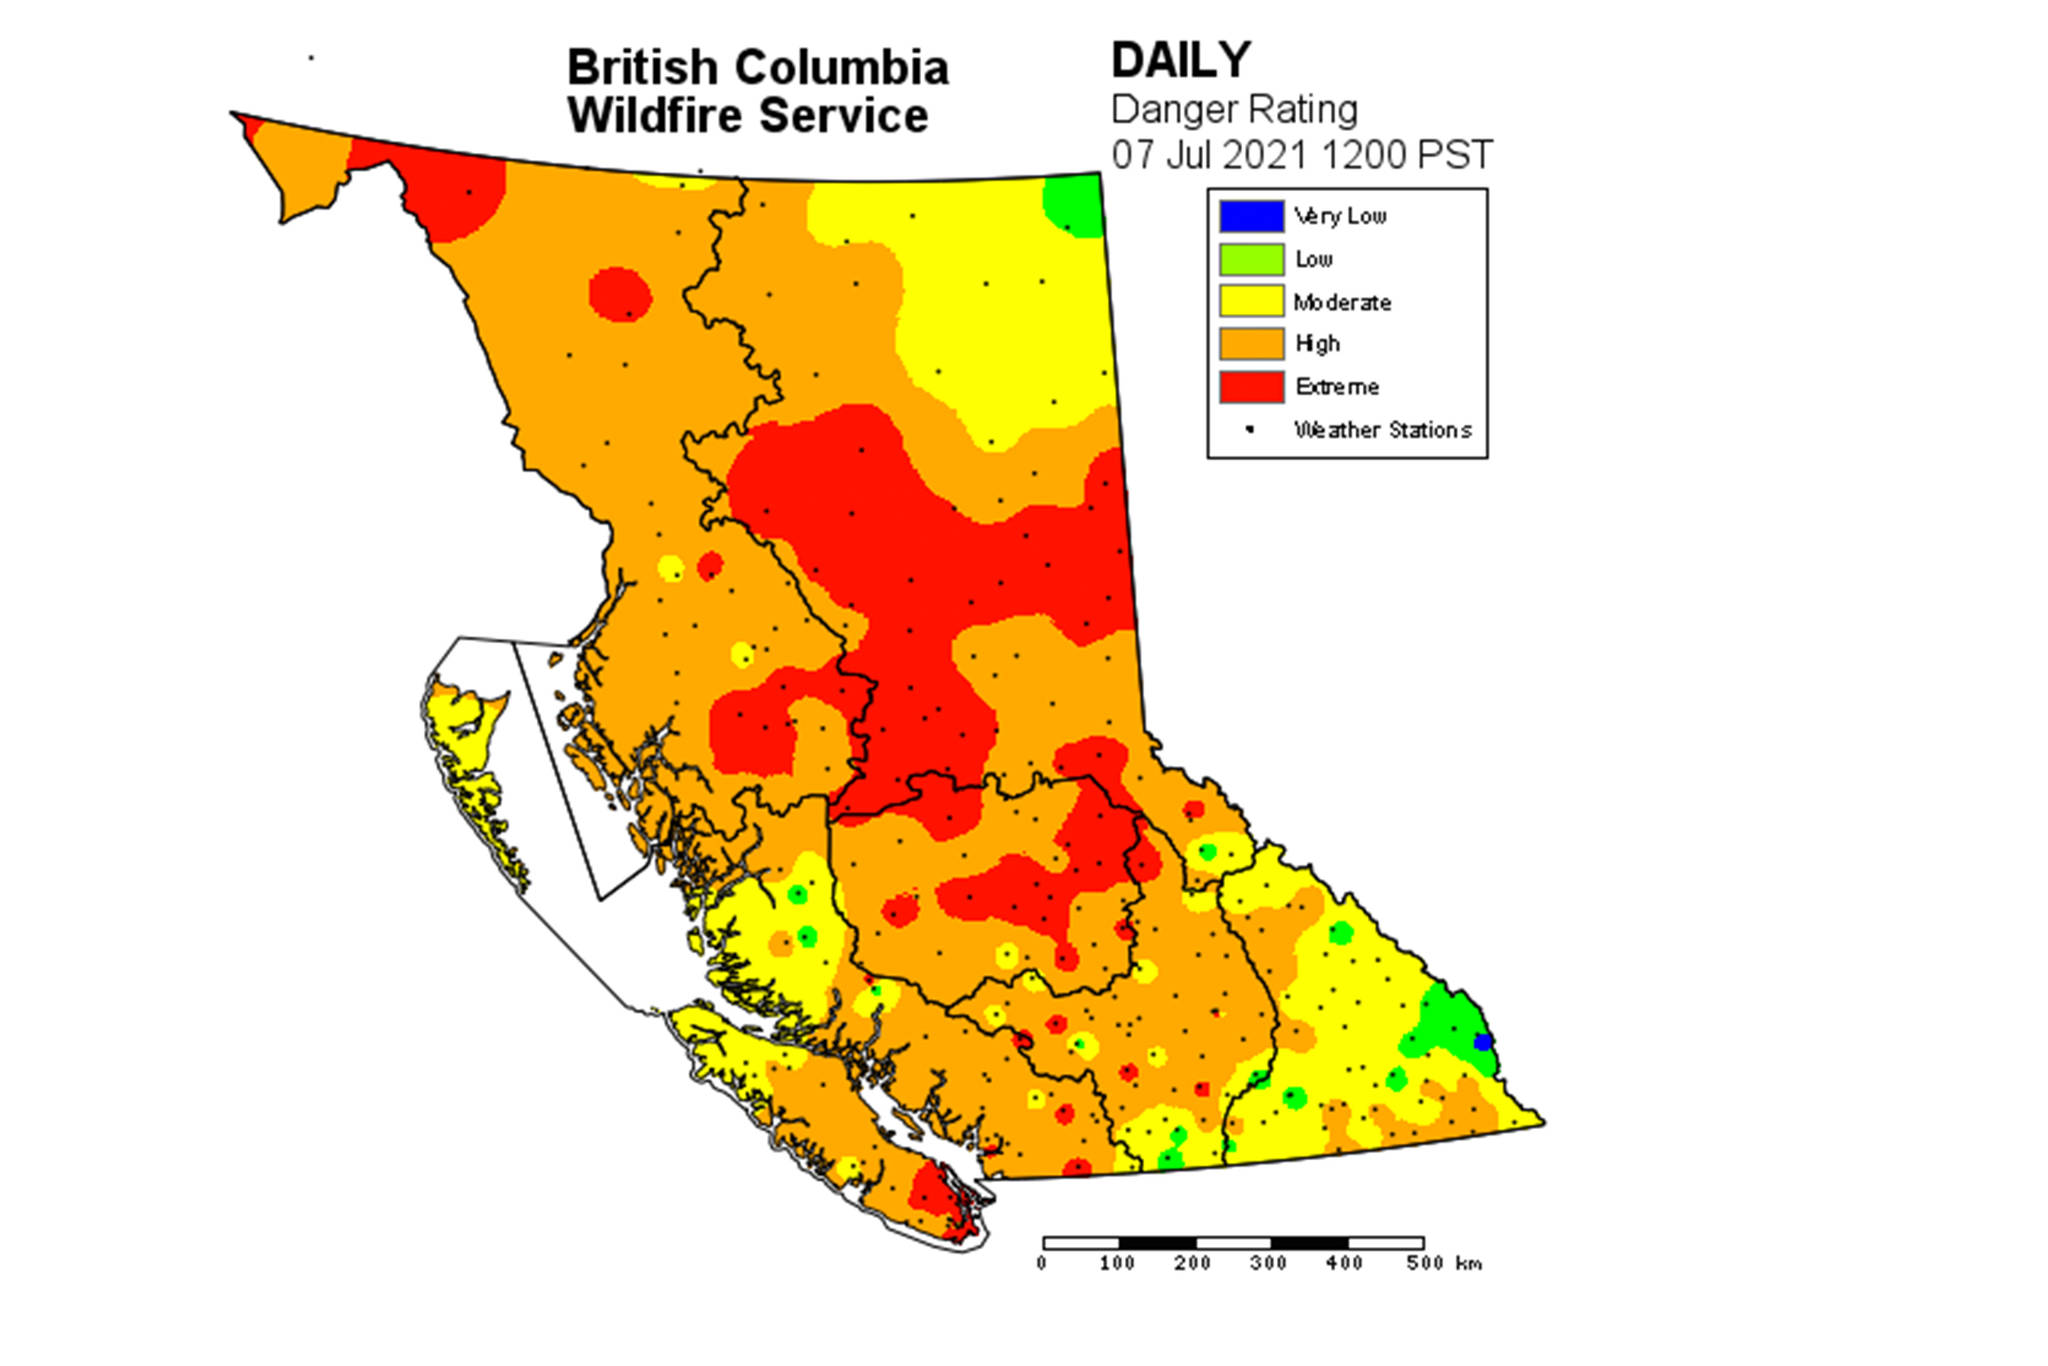 Fire danger rating throughout the province is high, including the hot and dry Okanagan-Shuswap region. (B.C. Wildfire Service)